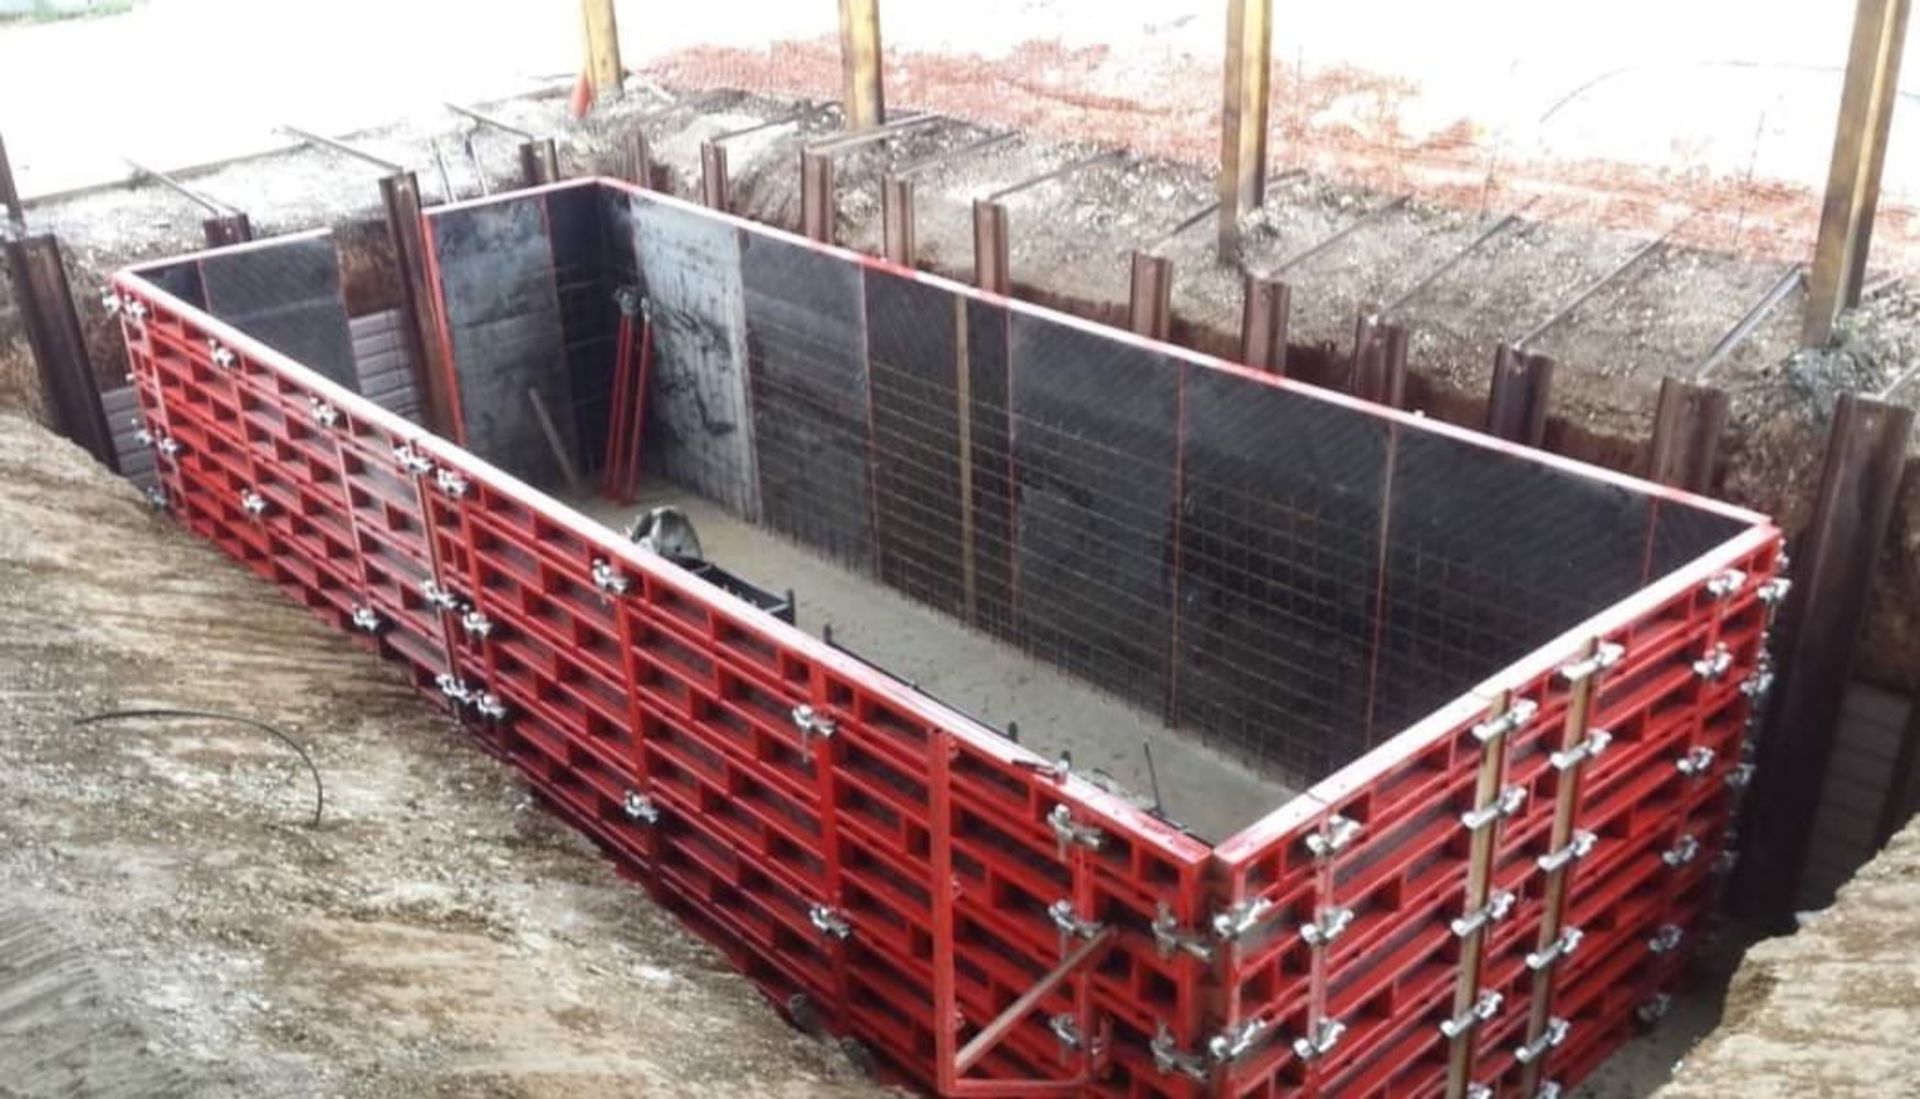 Quantity of 1.8 metre formwork panels & fittings Comprising of: 20 - 3000mm x 1800mm formwork panels - Image 12 of 12